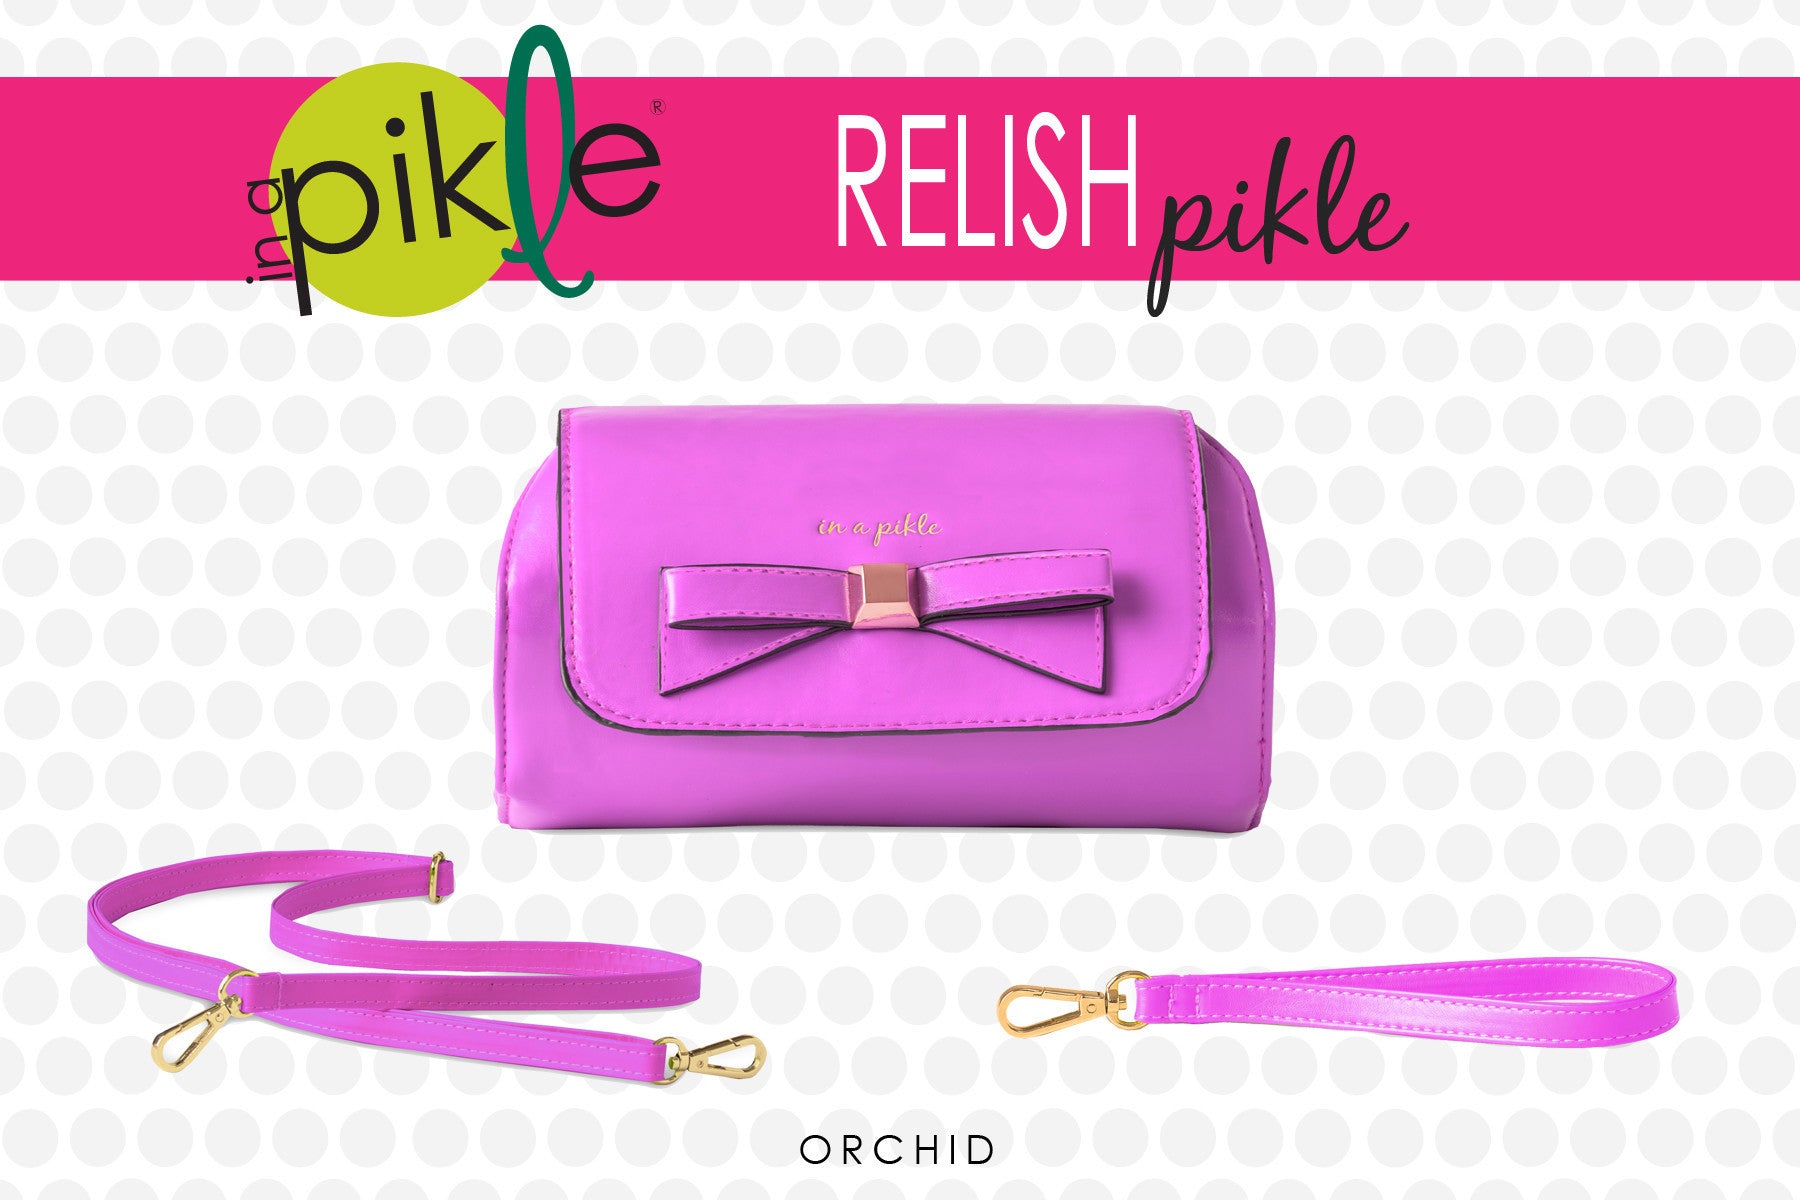 Relish - Orchid